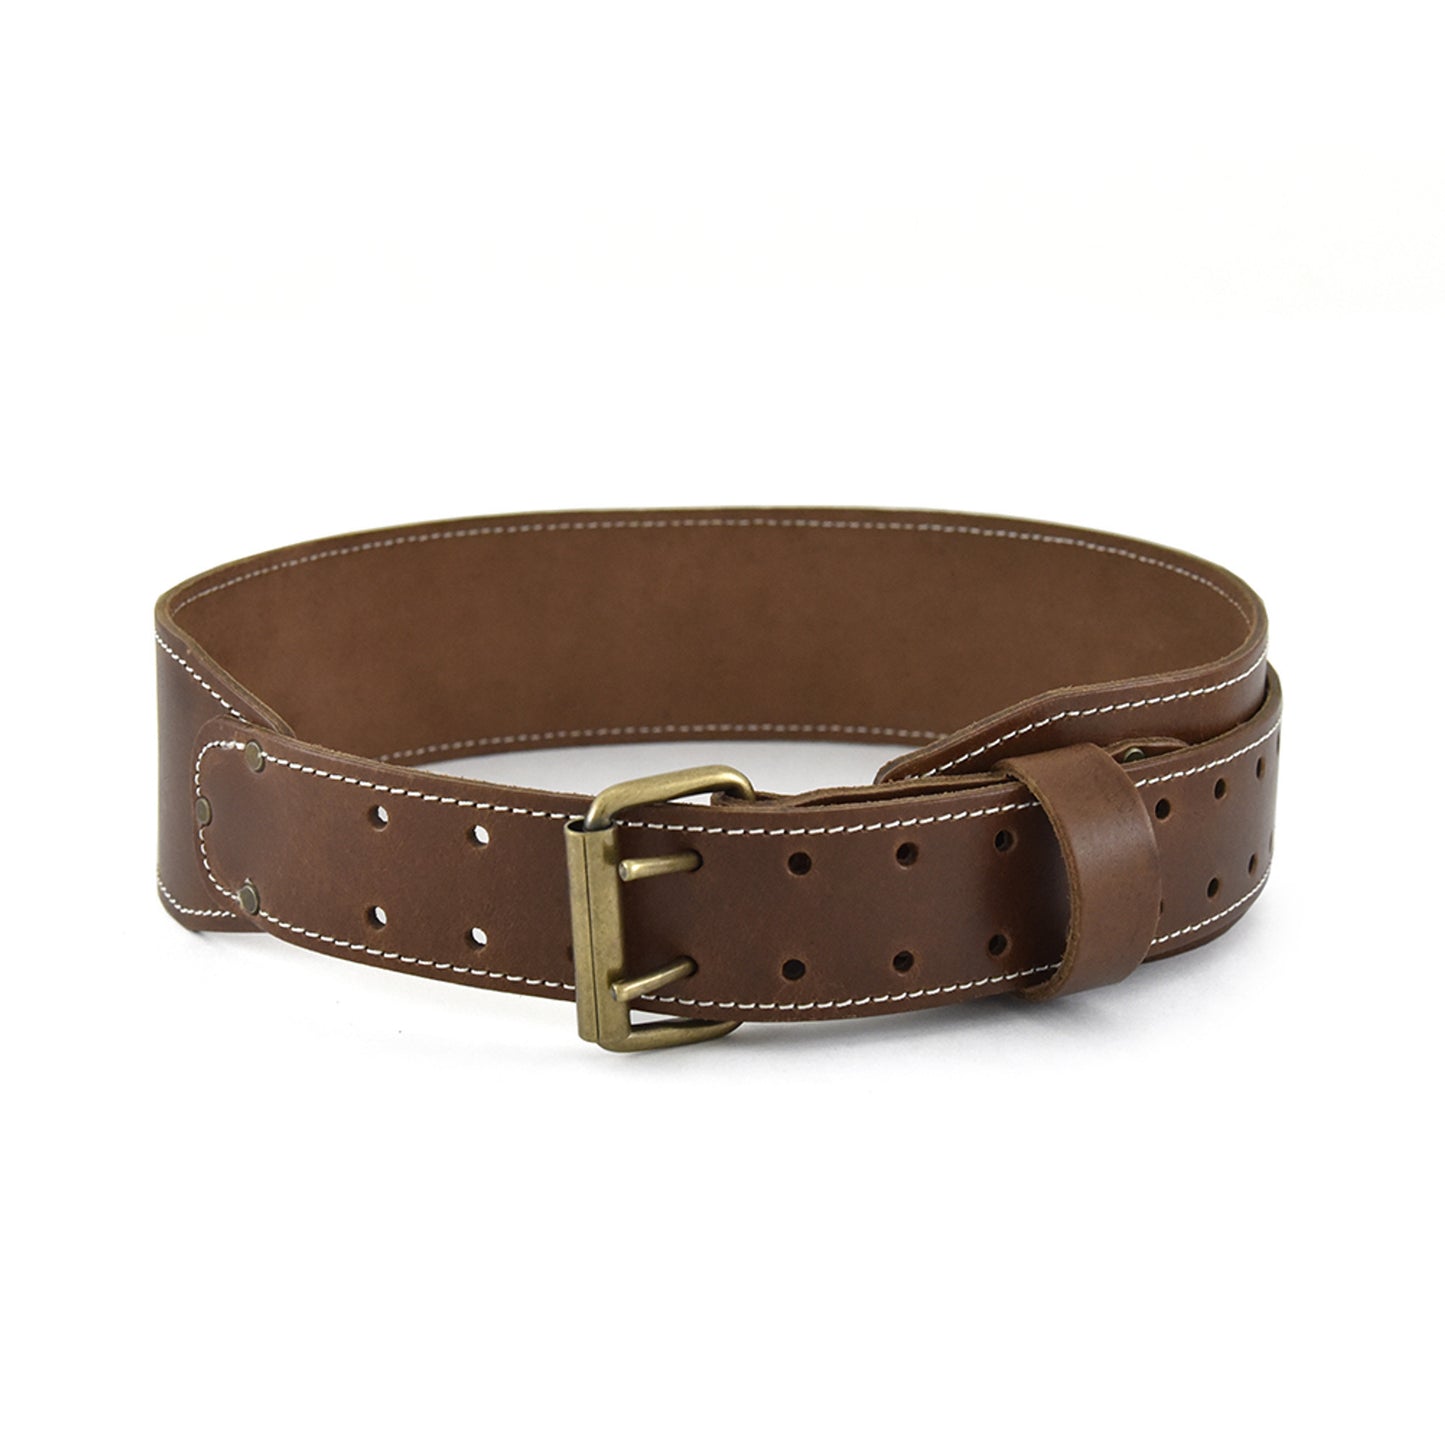 3 Inch Wide Extra Long Tapered Leather Work Belt | Style n Craft | # 98439